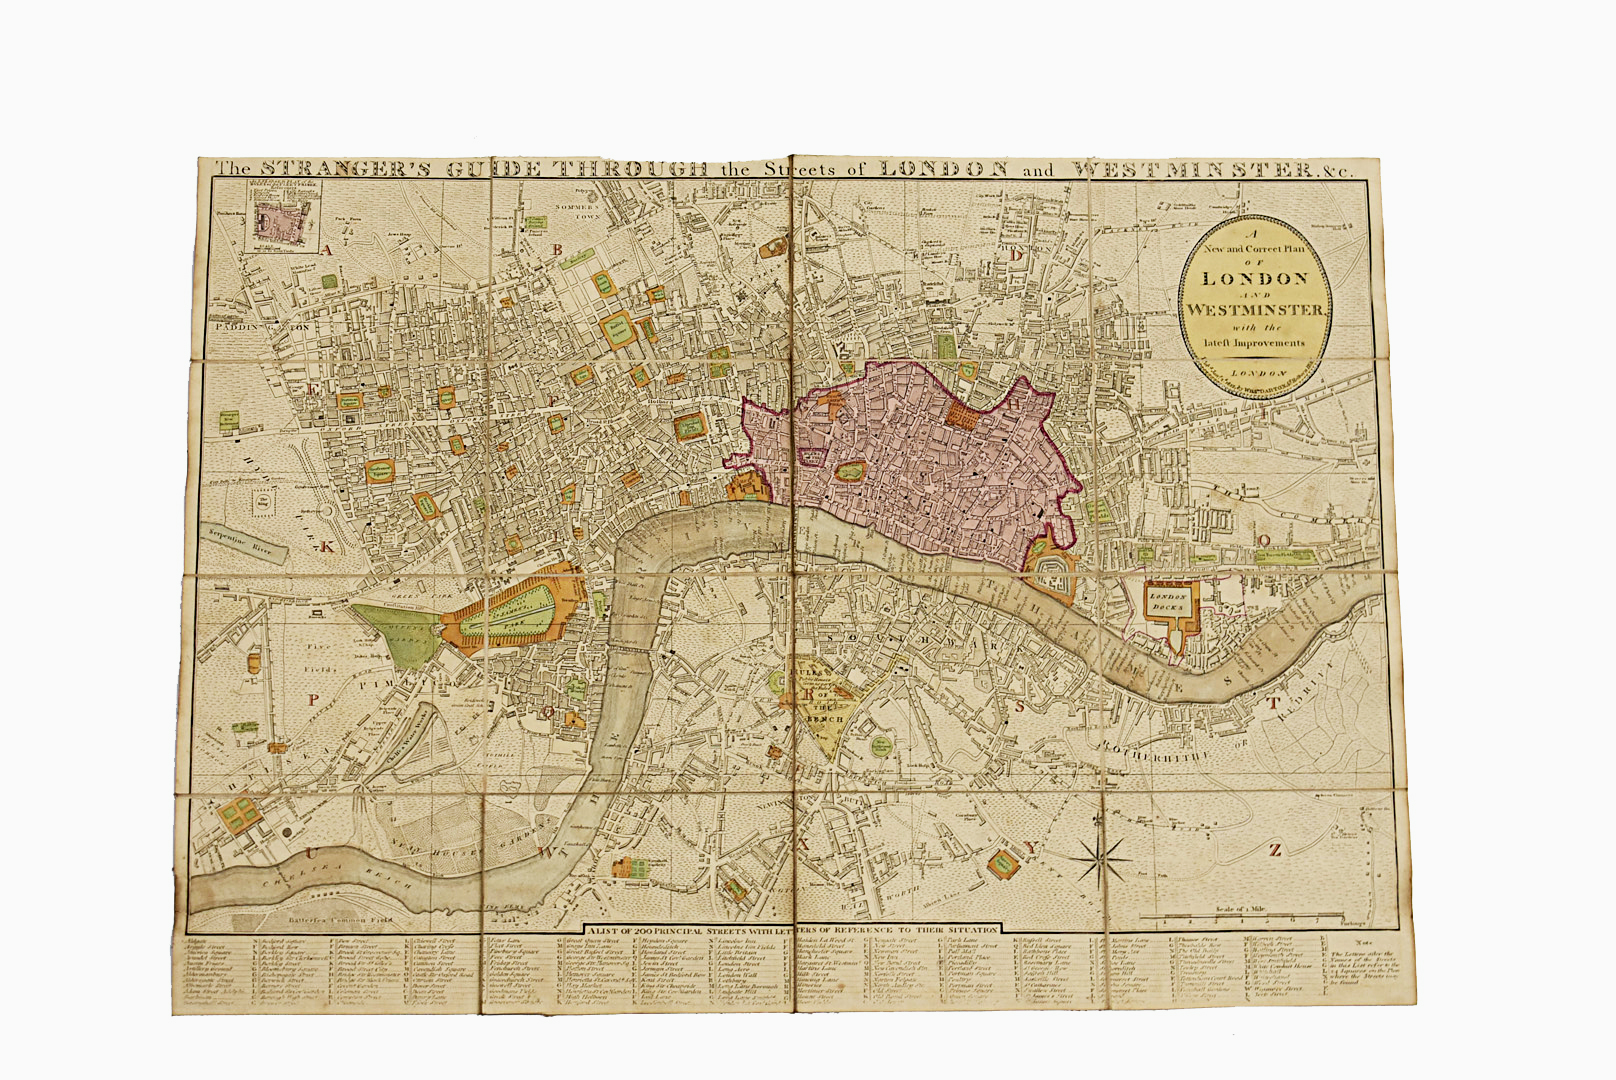 London and Westminster - William Darton, A New and Correct Plan of London and Westminster with the